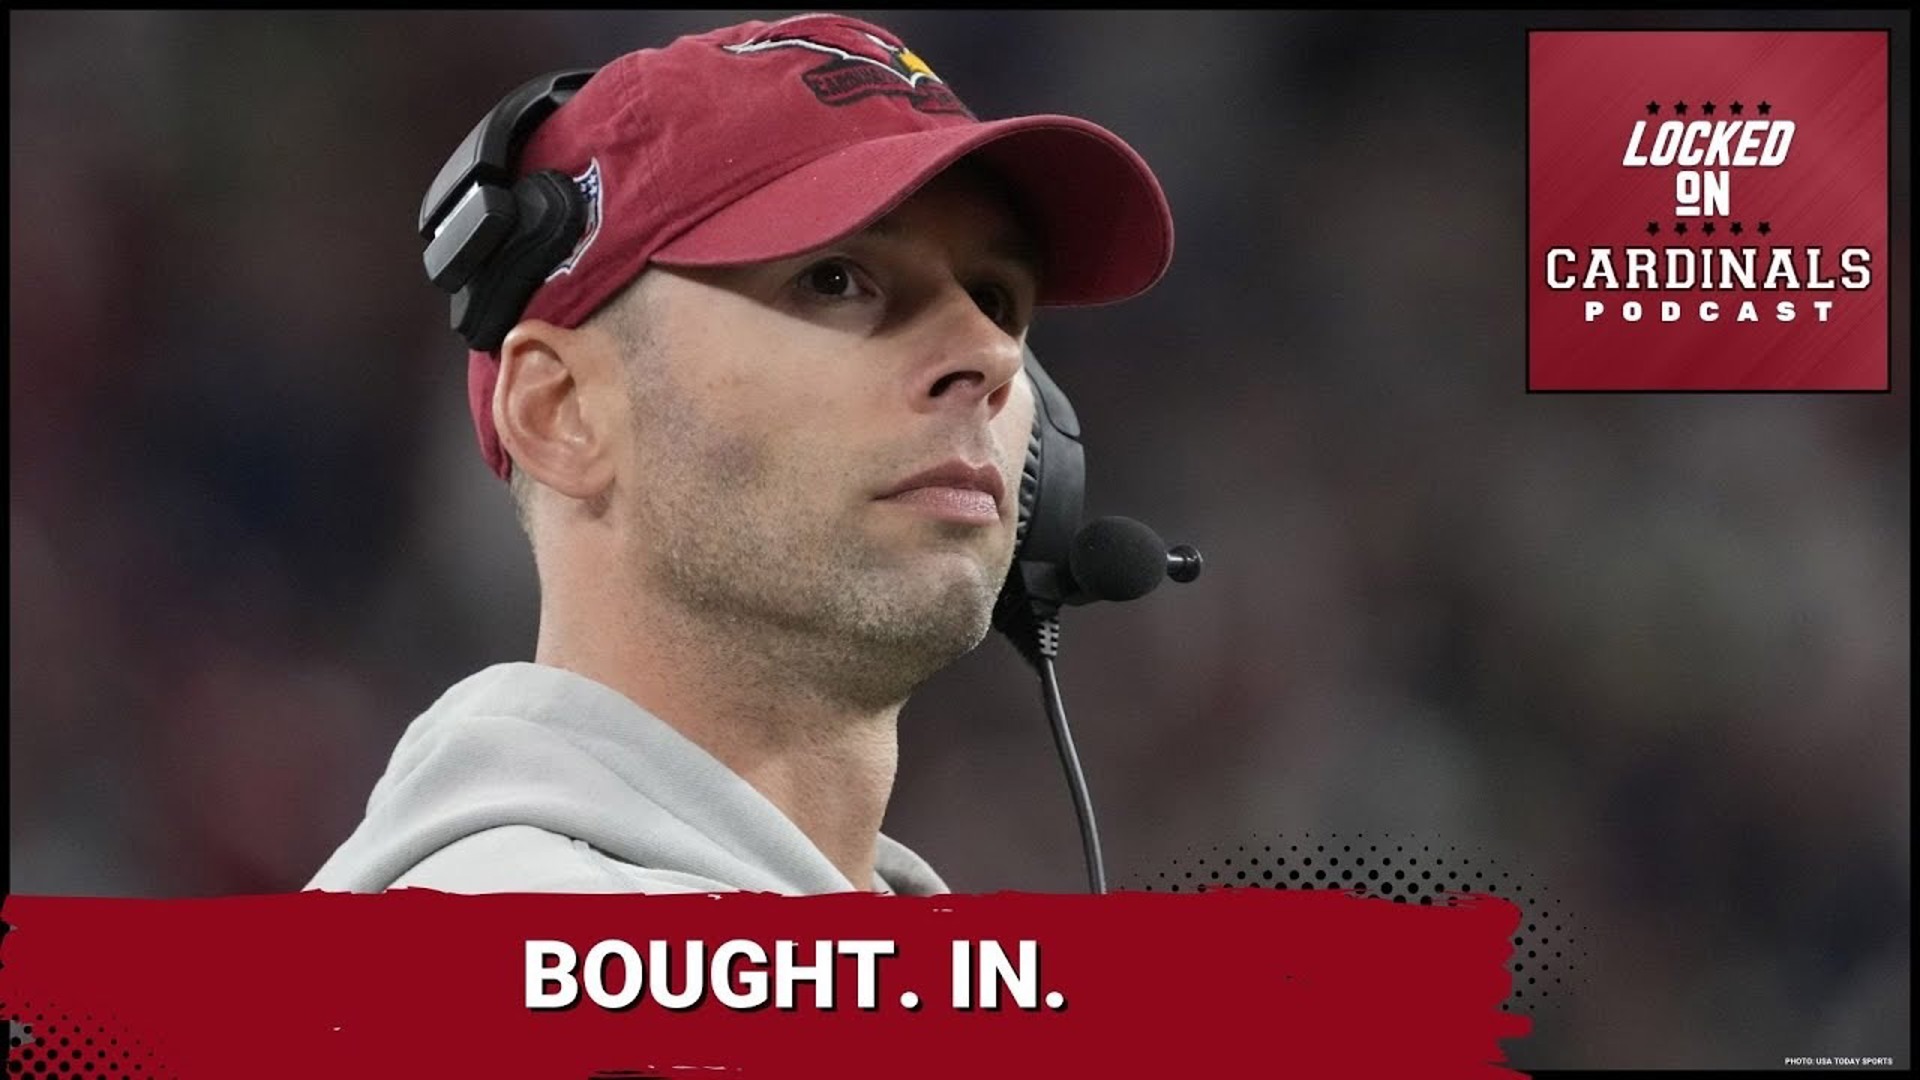 Arizona Cardinals are a much better version of themselves than they were a couple years ago.